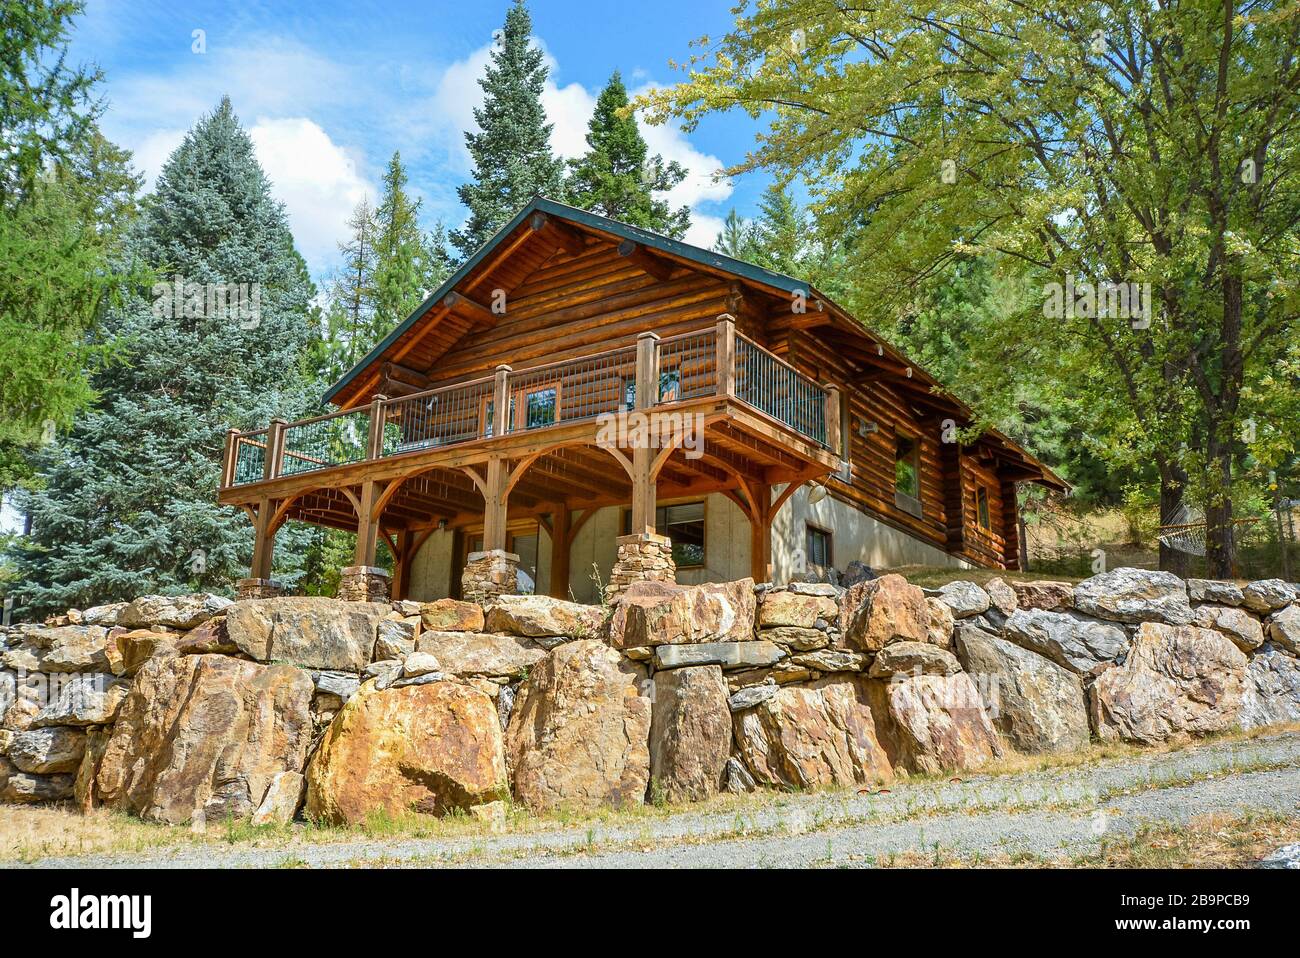 A picturesque rustic log home in the mountains surrounded by pine trees on a rocky hillside in Coeur d'Alene, Idaho. Stock Photo